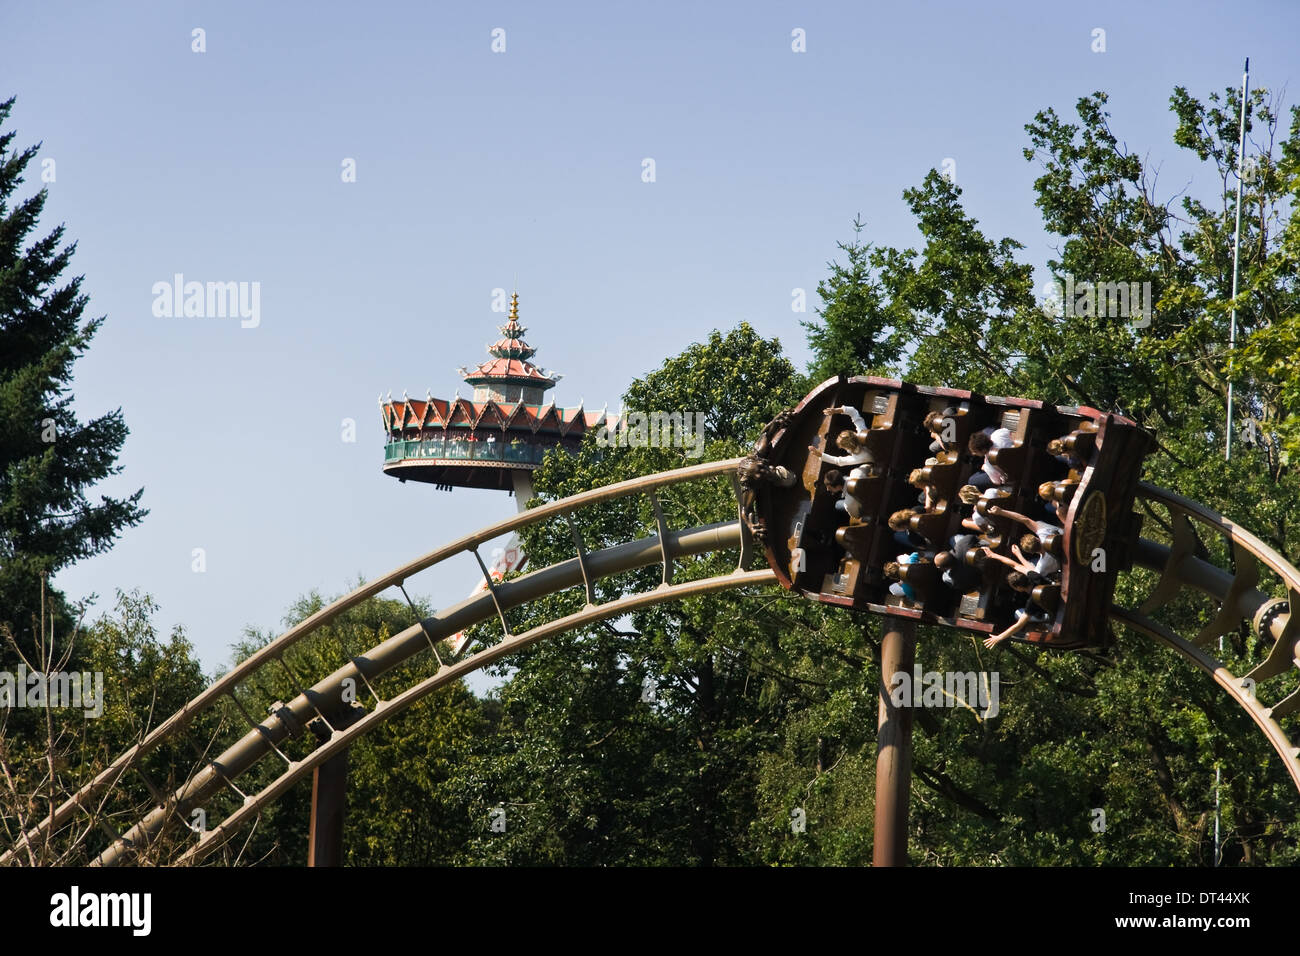 Water Rollercoaster at the Efteling located at Kaatsheuvel in the Netherlands. Fantasy based family themepark. Stock Photo